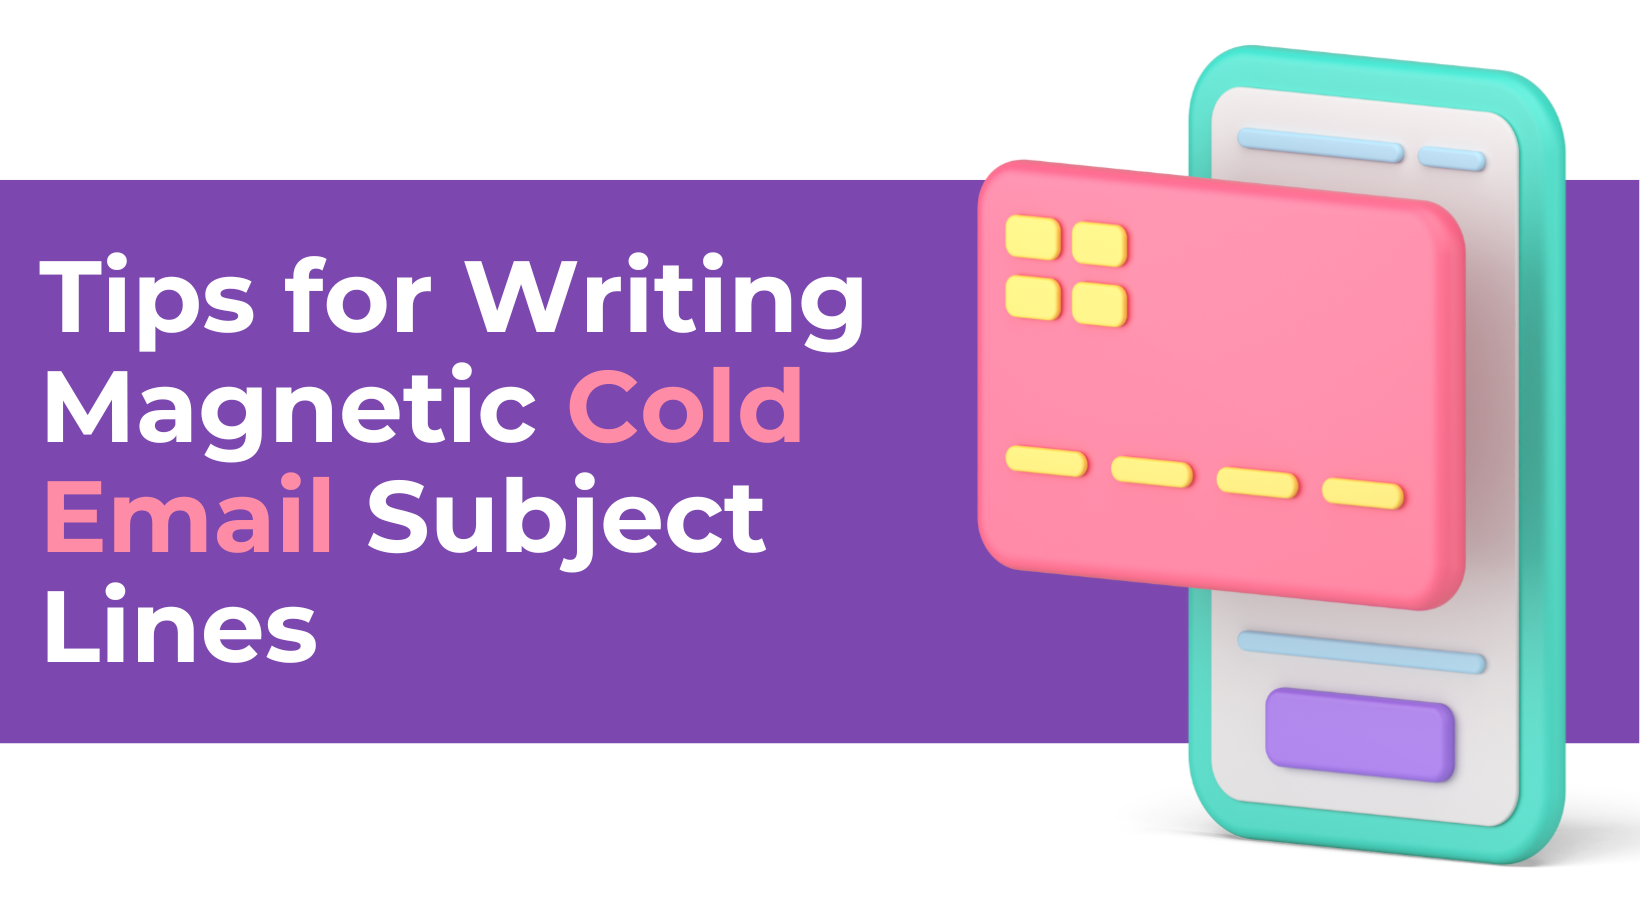 Tips for Writing Magnetic Cold Email Subject Lines